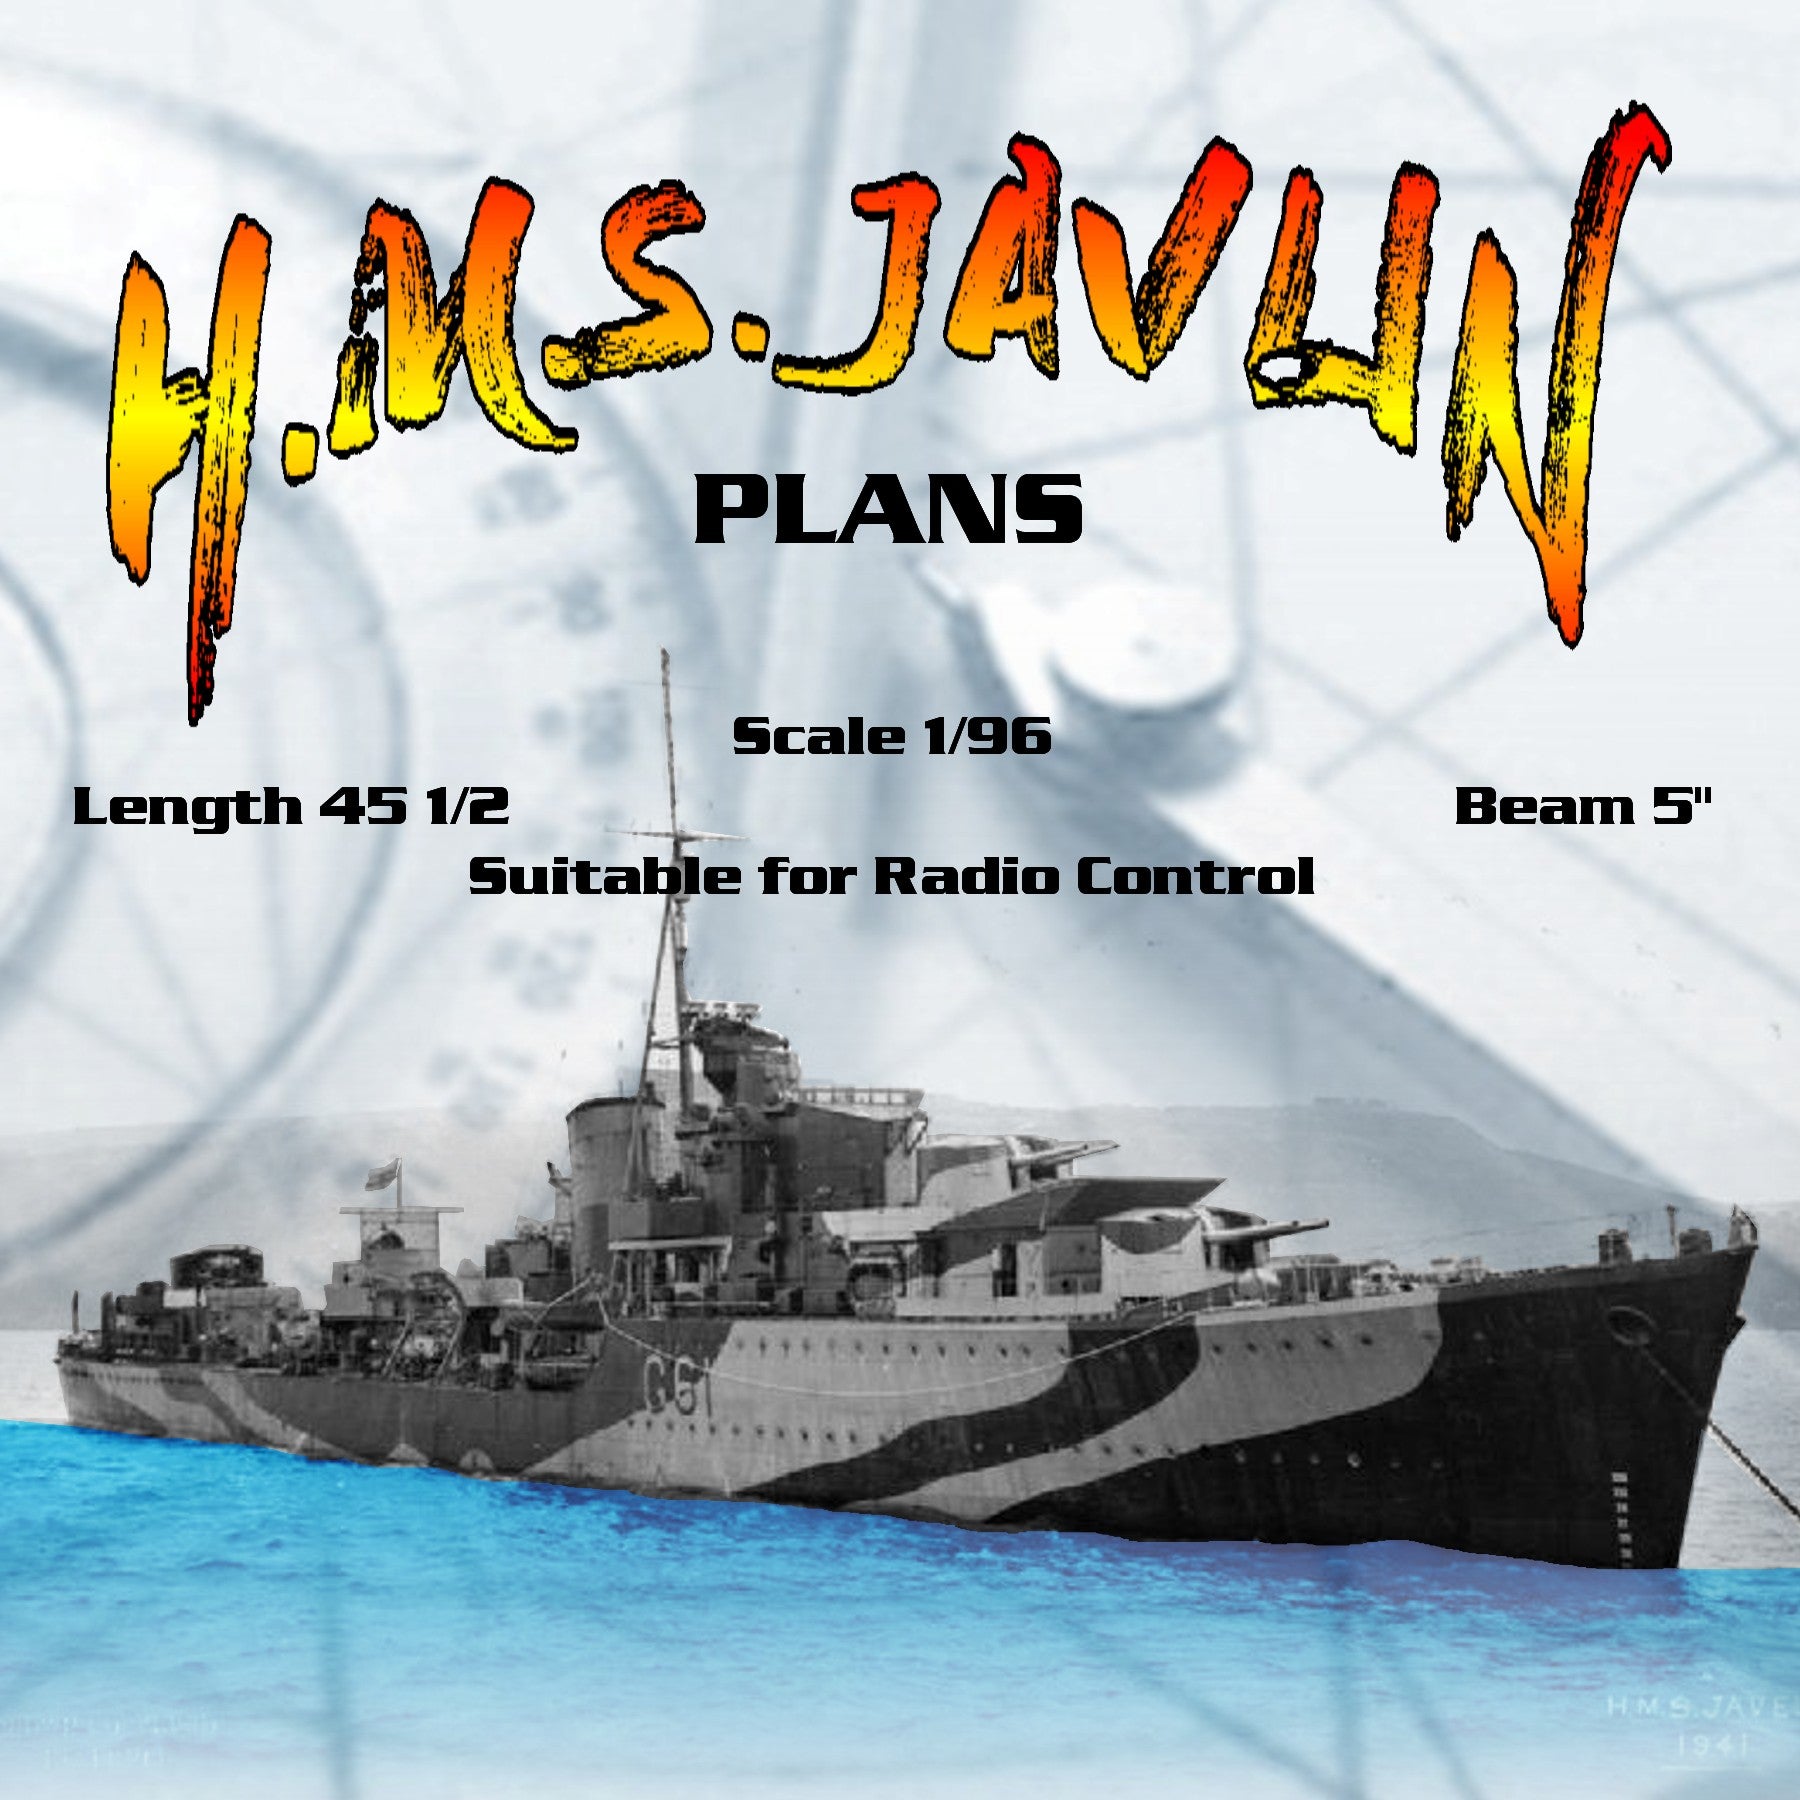 full size printed plans scale 1/96 j class destroyer h.m.s. javlin l 45 1/2" suitable for radio control